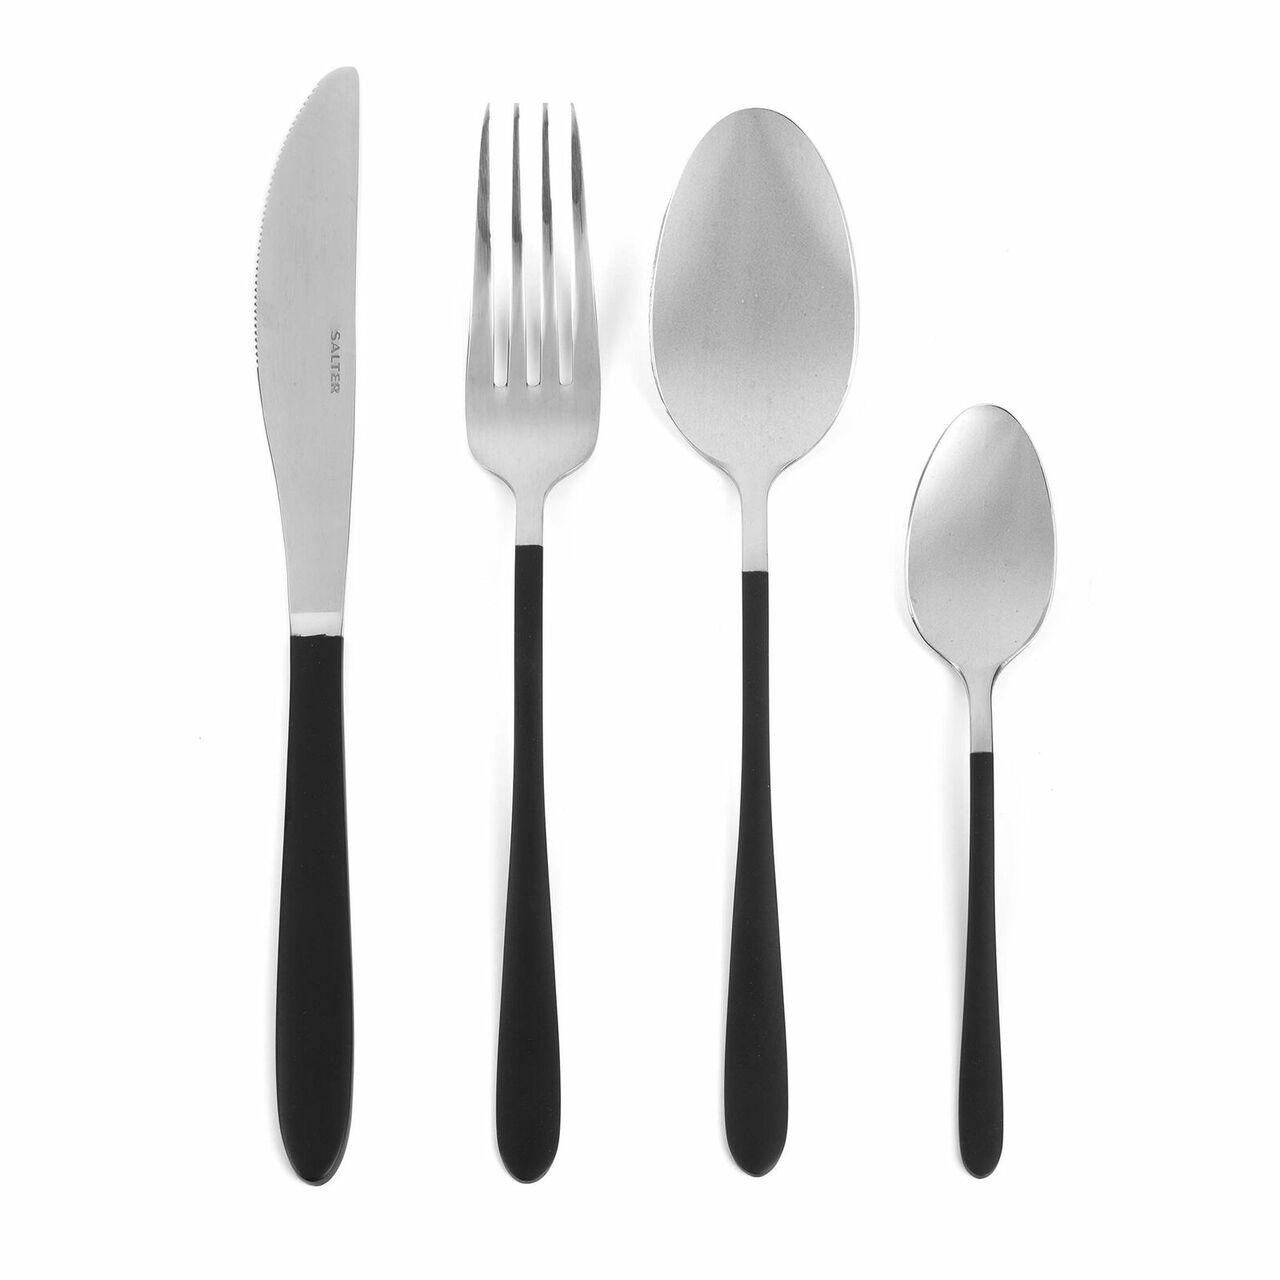 Salter NoirSilver 16-Piece Black and Silver Cutlery Set, Stainless Steel, Black Coated Handles 5054061188127 BW07217